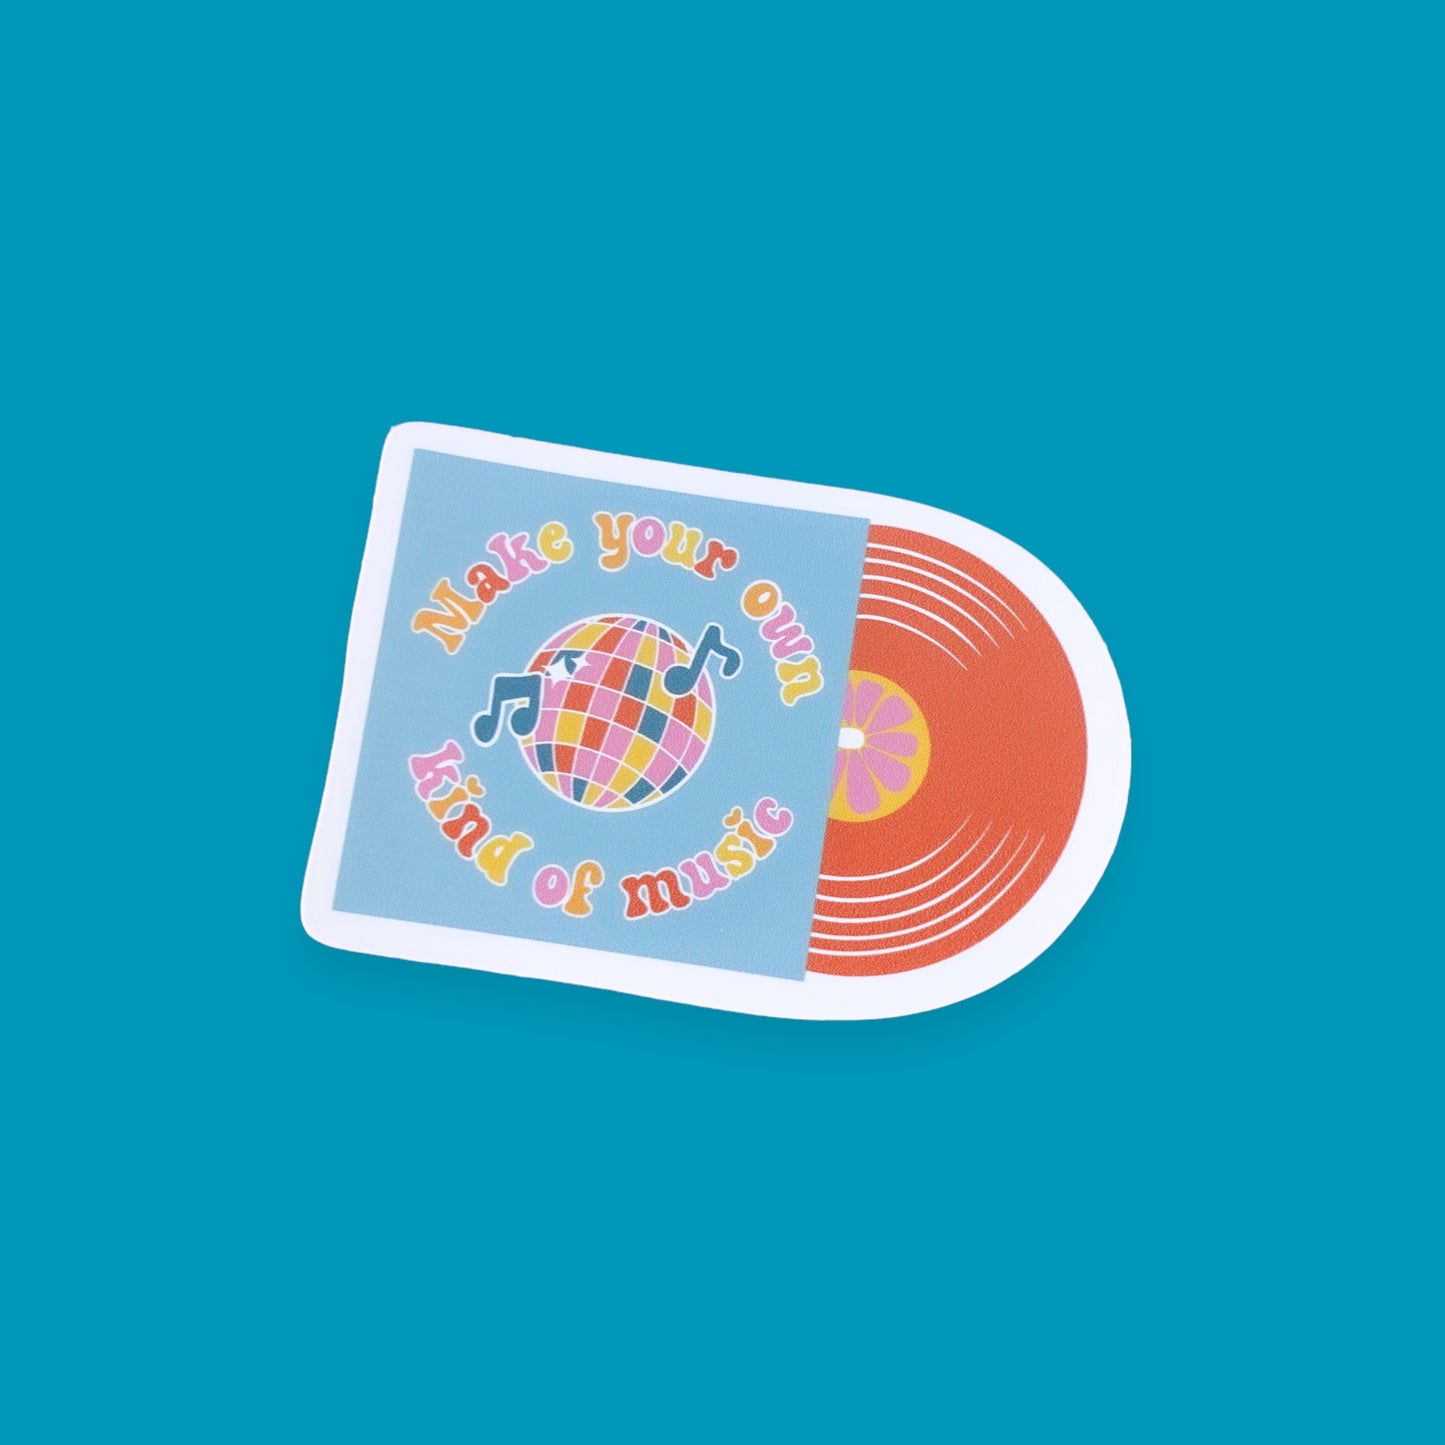 Make Your Own Kind of Music Sticker